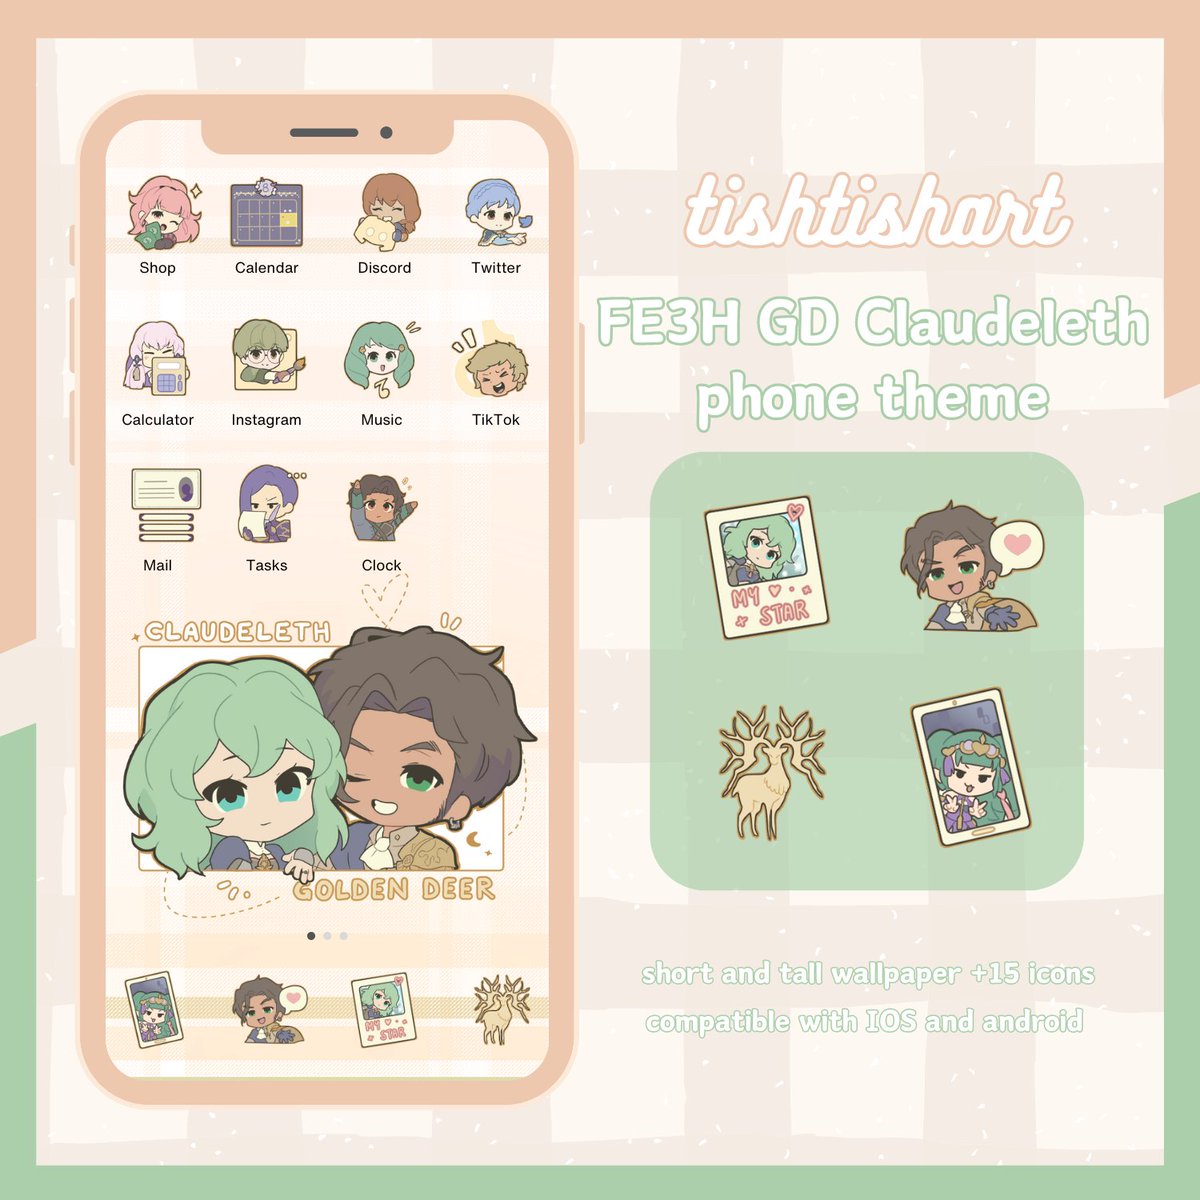 Absolutely chuffed to be participating in another @TheEmblemCon , this time in the CC Corridor! I'll be offer these styles only while the event is on ✨ Also made some adorable phone themes for the occasion! 🔗⬇️